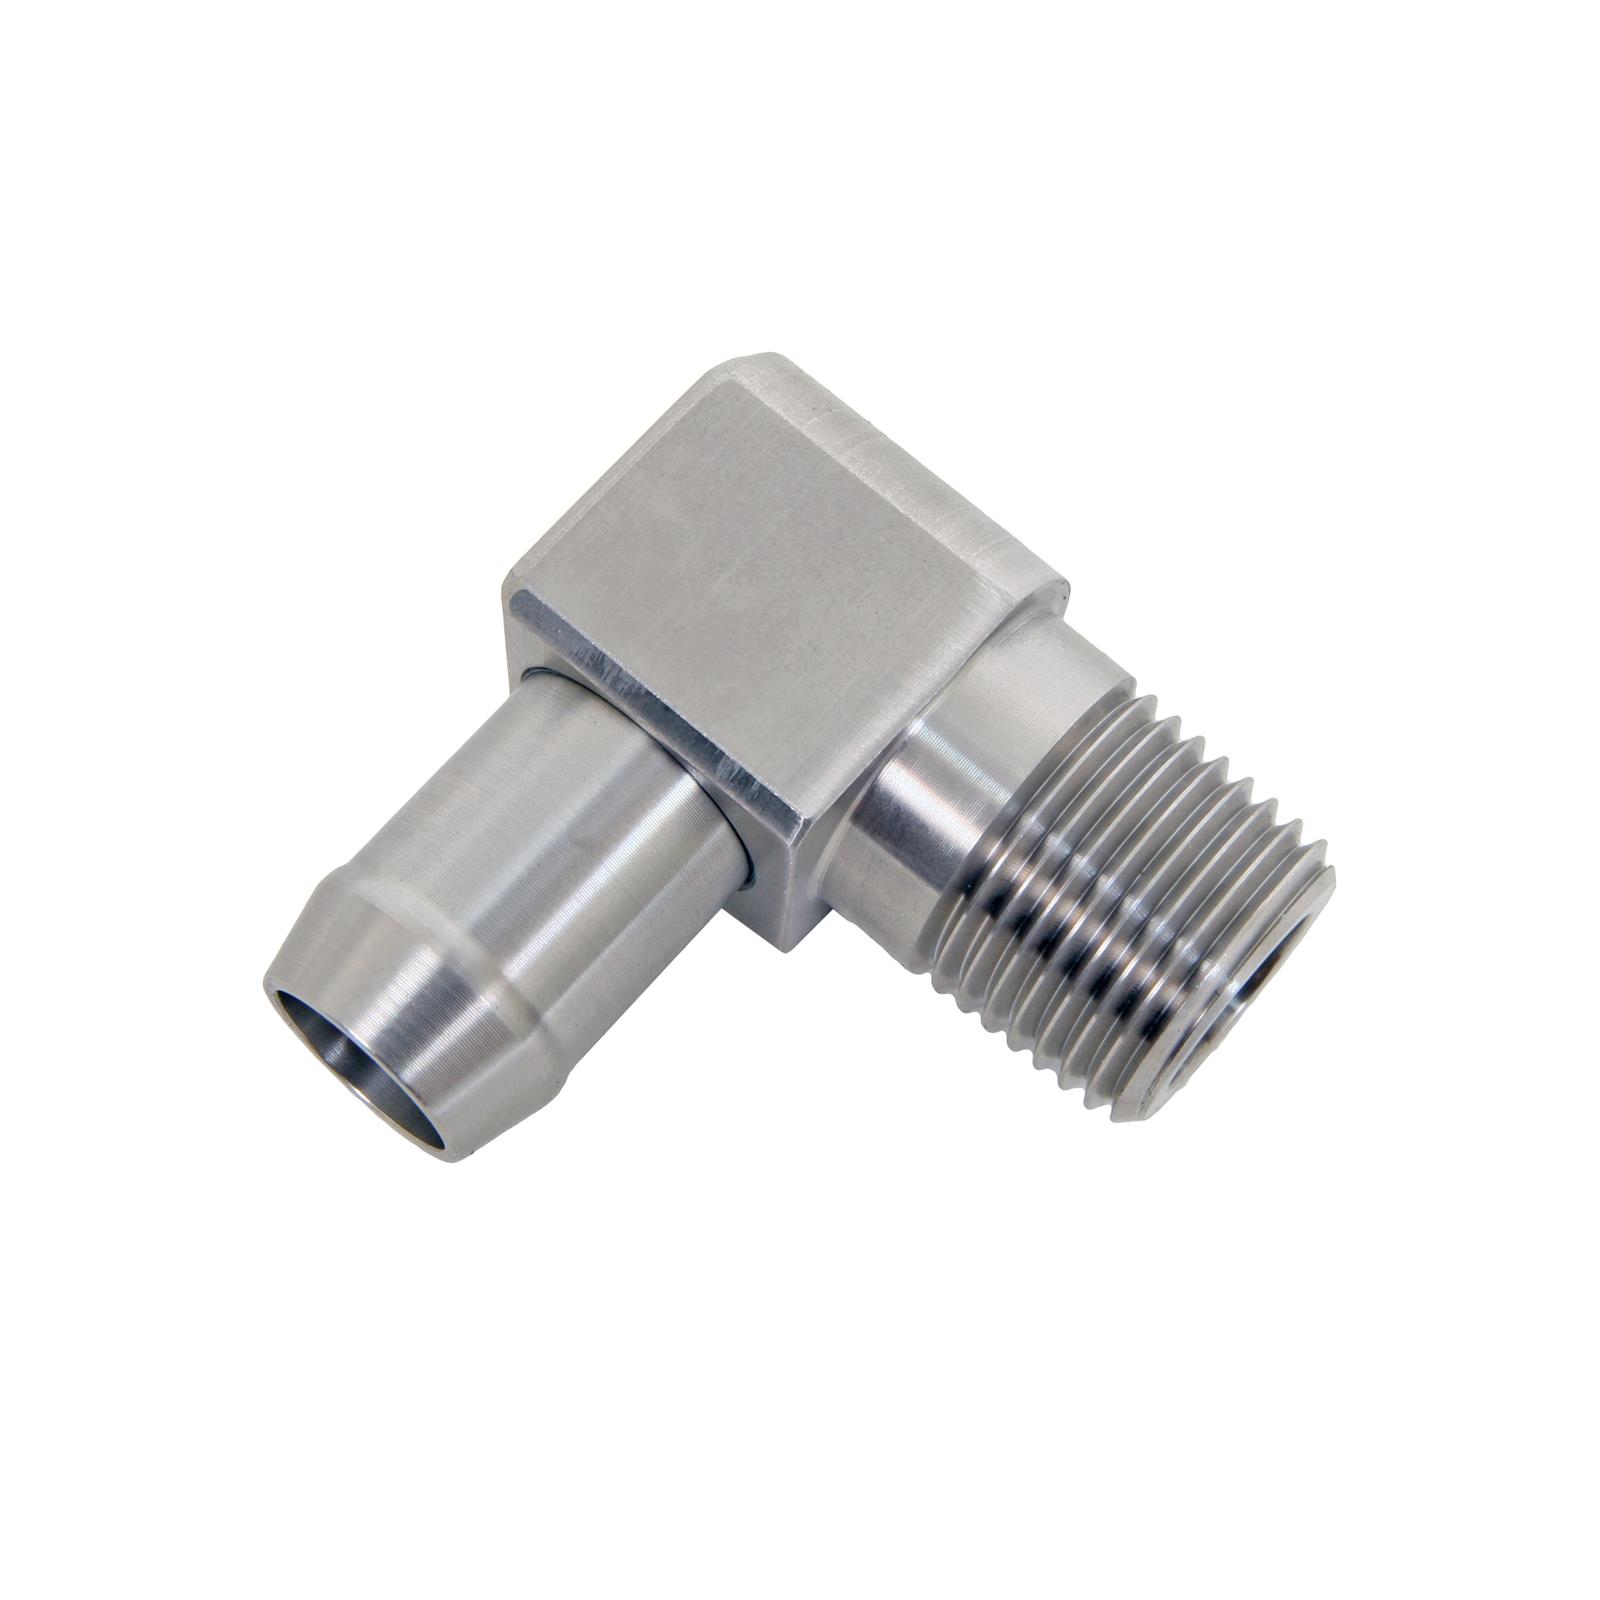 Qiilu 4530 Heater Hose Fitting Heater Hose Connectors for 3/4in Water Pump 5/8in 90 Degrees for SBC V8 Engines 